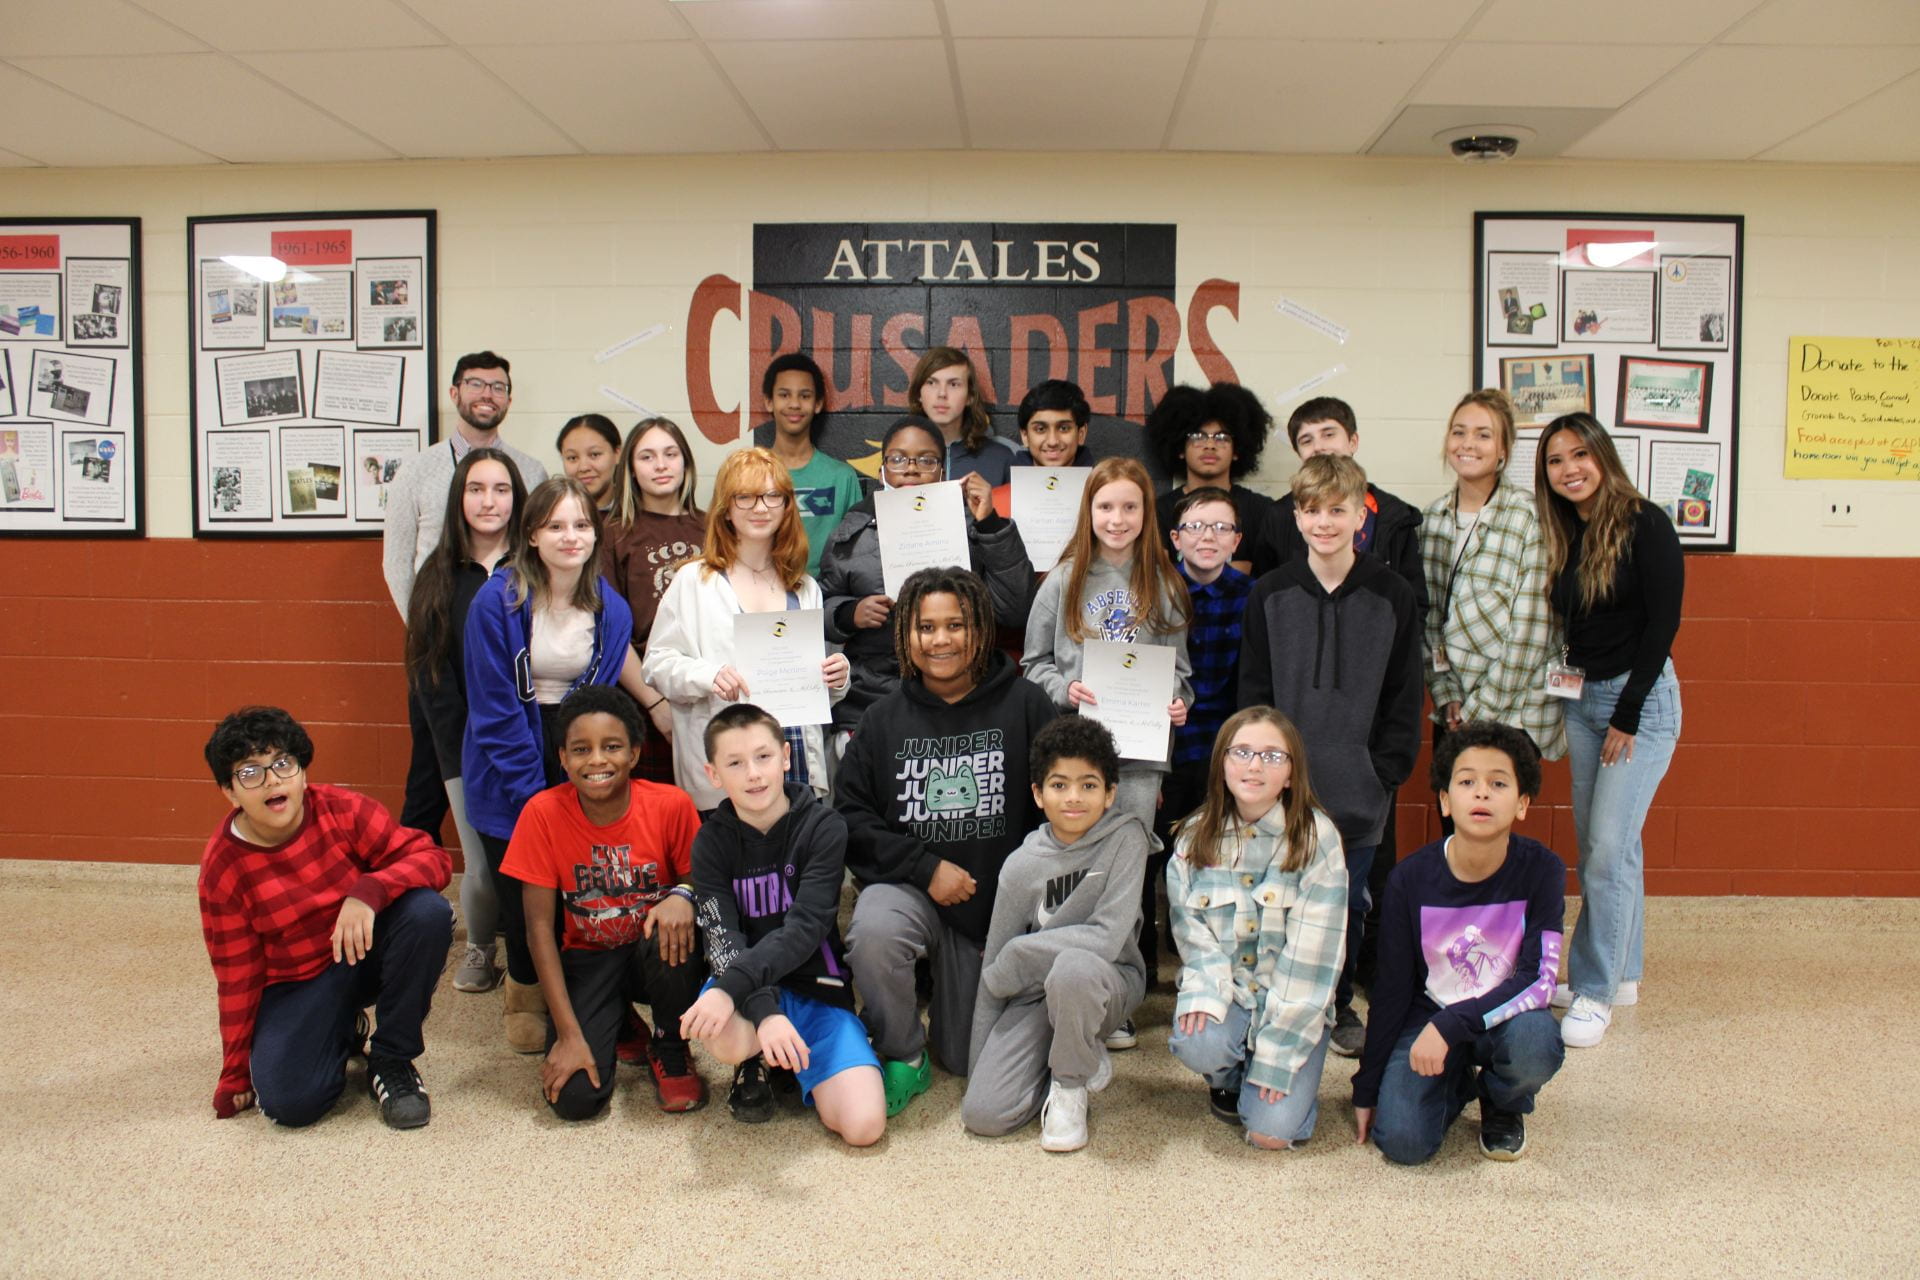 Attales Spelling Bee participants pose for a photo.